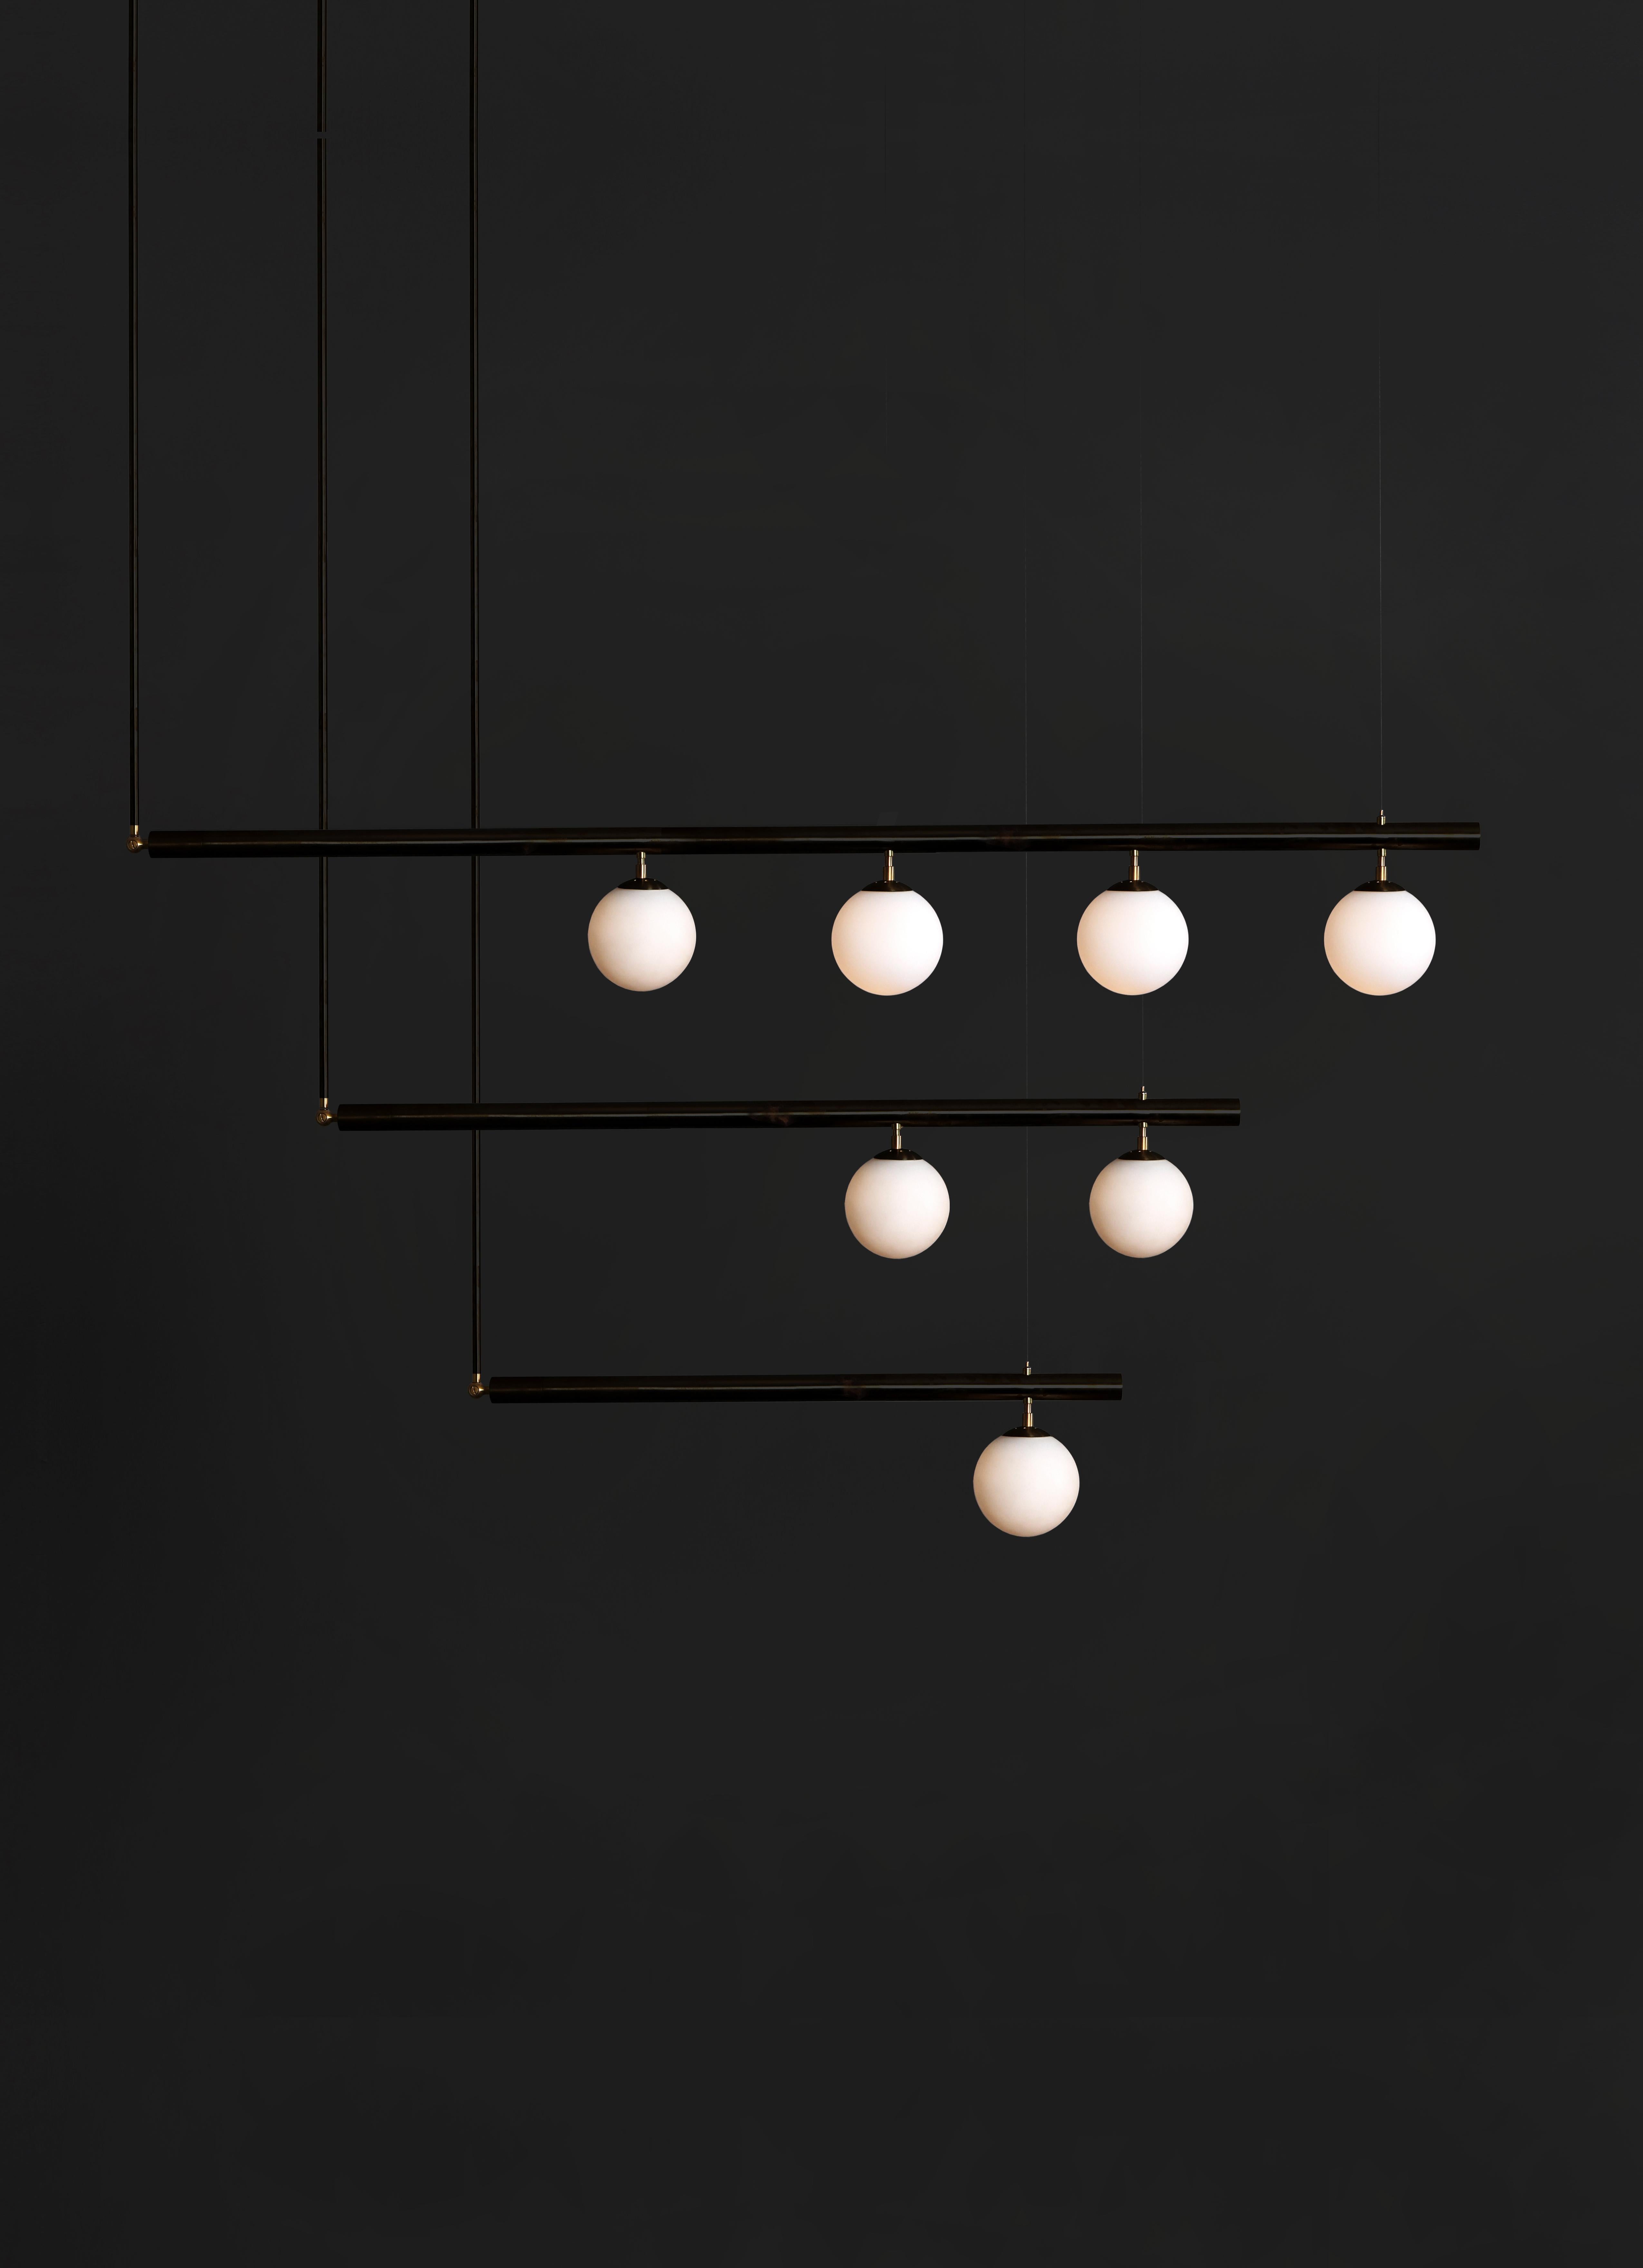 Set of black satellite I II IV sculpted pendant by Paul Matter
Blackened brass with brushed brass details
Dimensions: 182 x 89 x 15.2 cm
182 x 129 x 15.2 cm
182 x 180 x 15.2 cm
 
Satellite is inspired by the conceptual and Minimalist movement